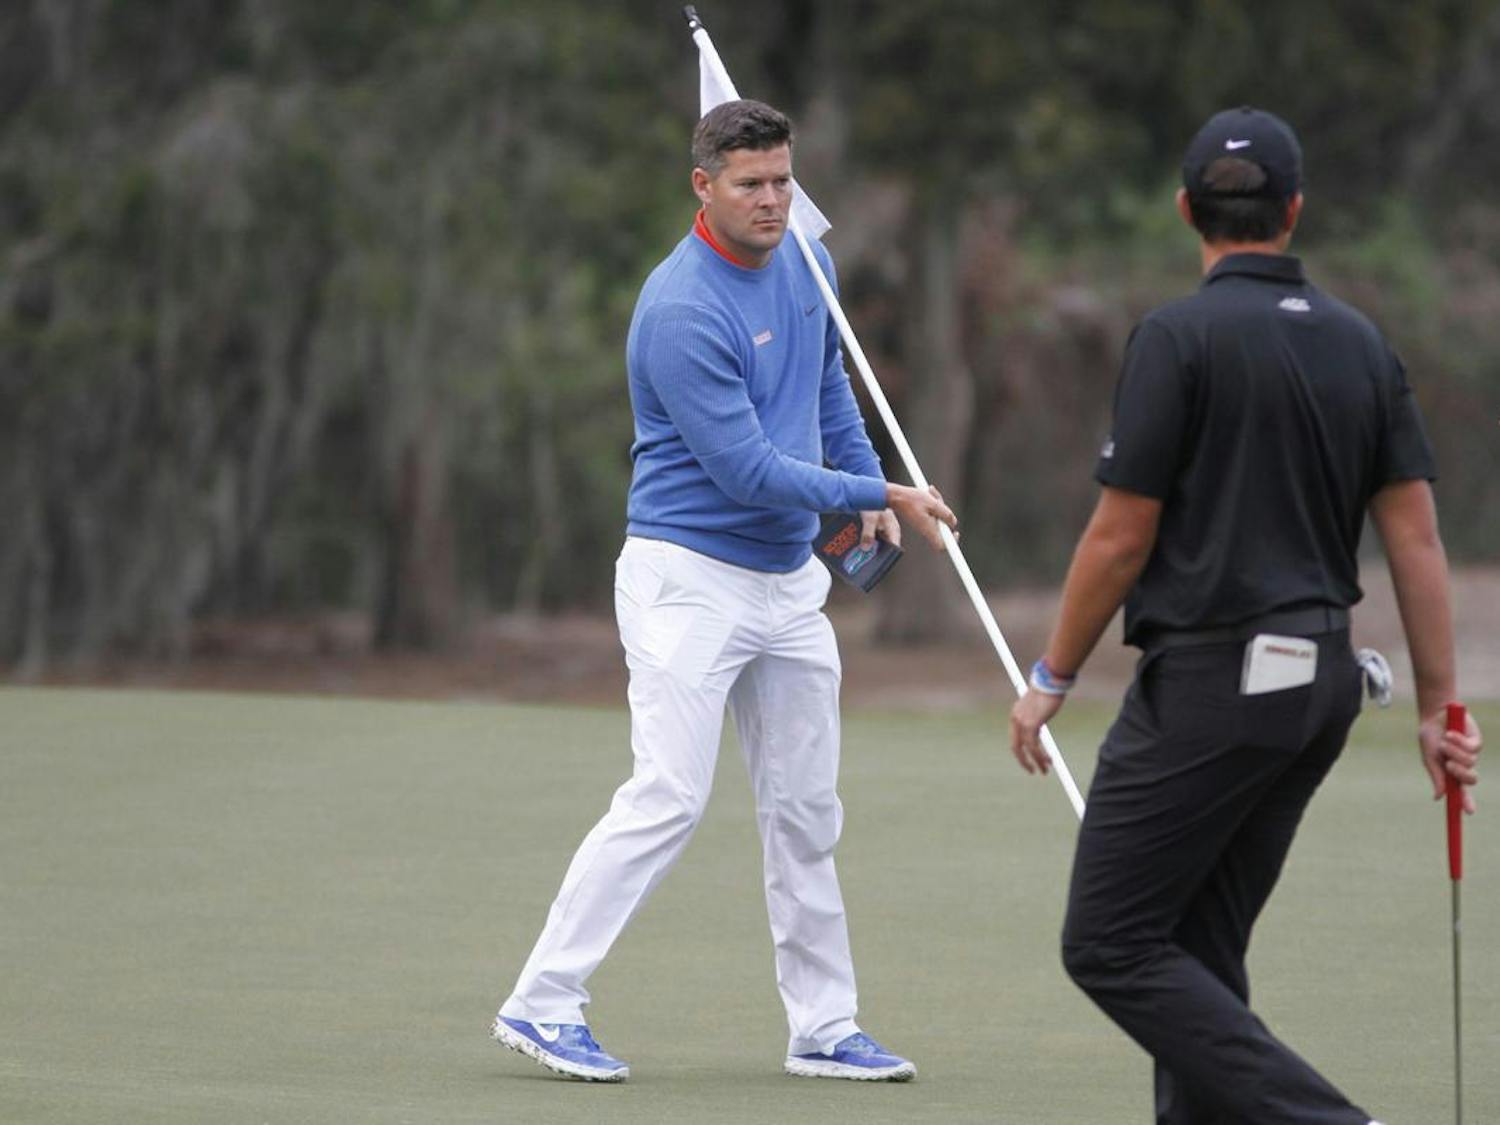 After a sixth place finish last month in Statesboro, Georgia, UF coach JC Deacon expressed his lukewarm feelings on his team's performance. “I think we’re doing OK, but I think our best golf is yet to come," he said. 